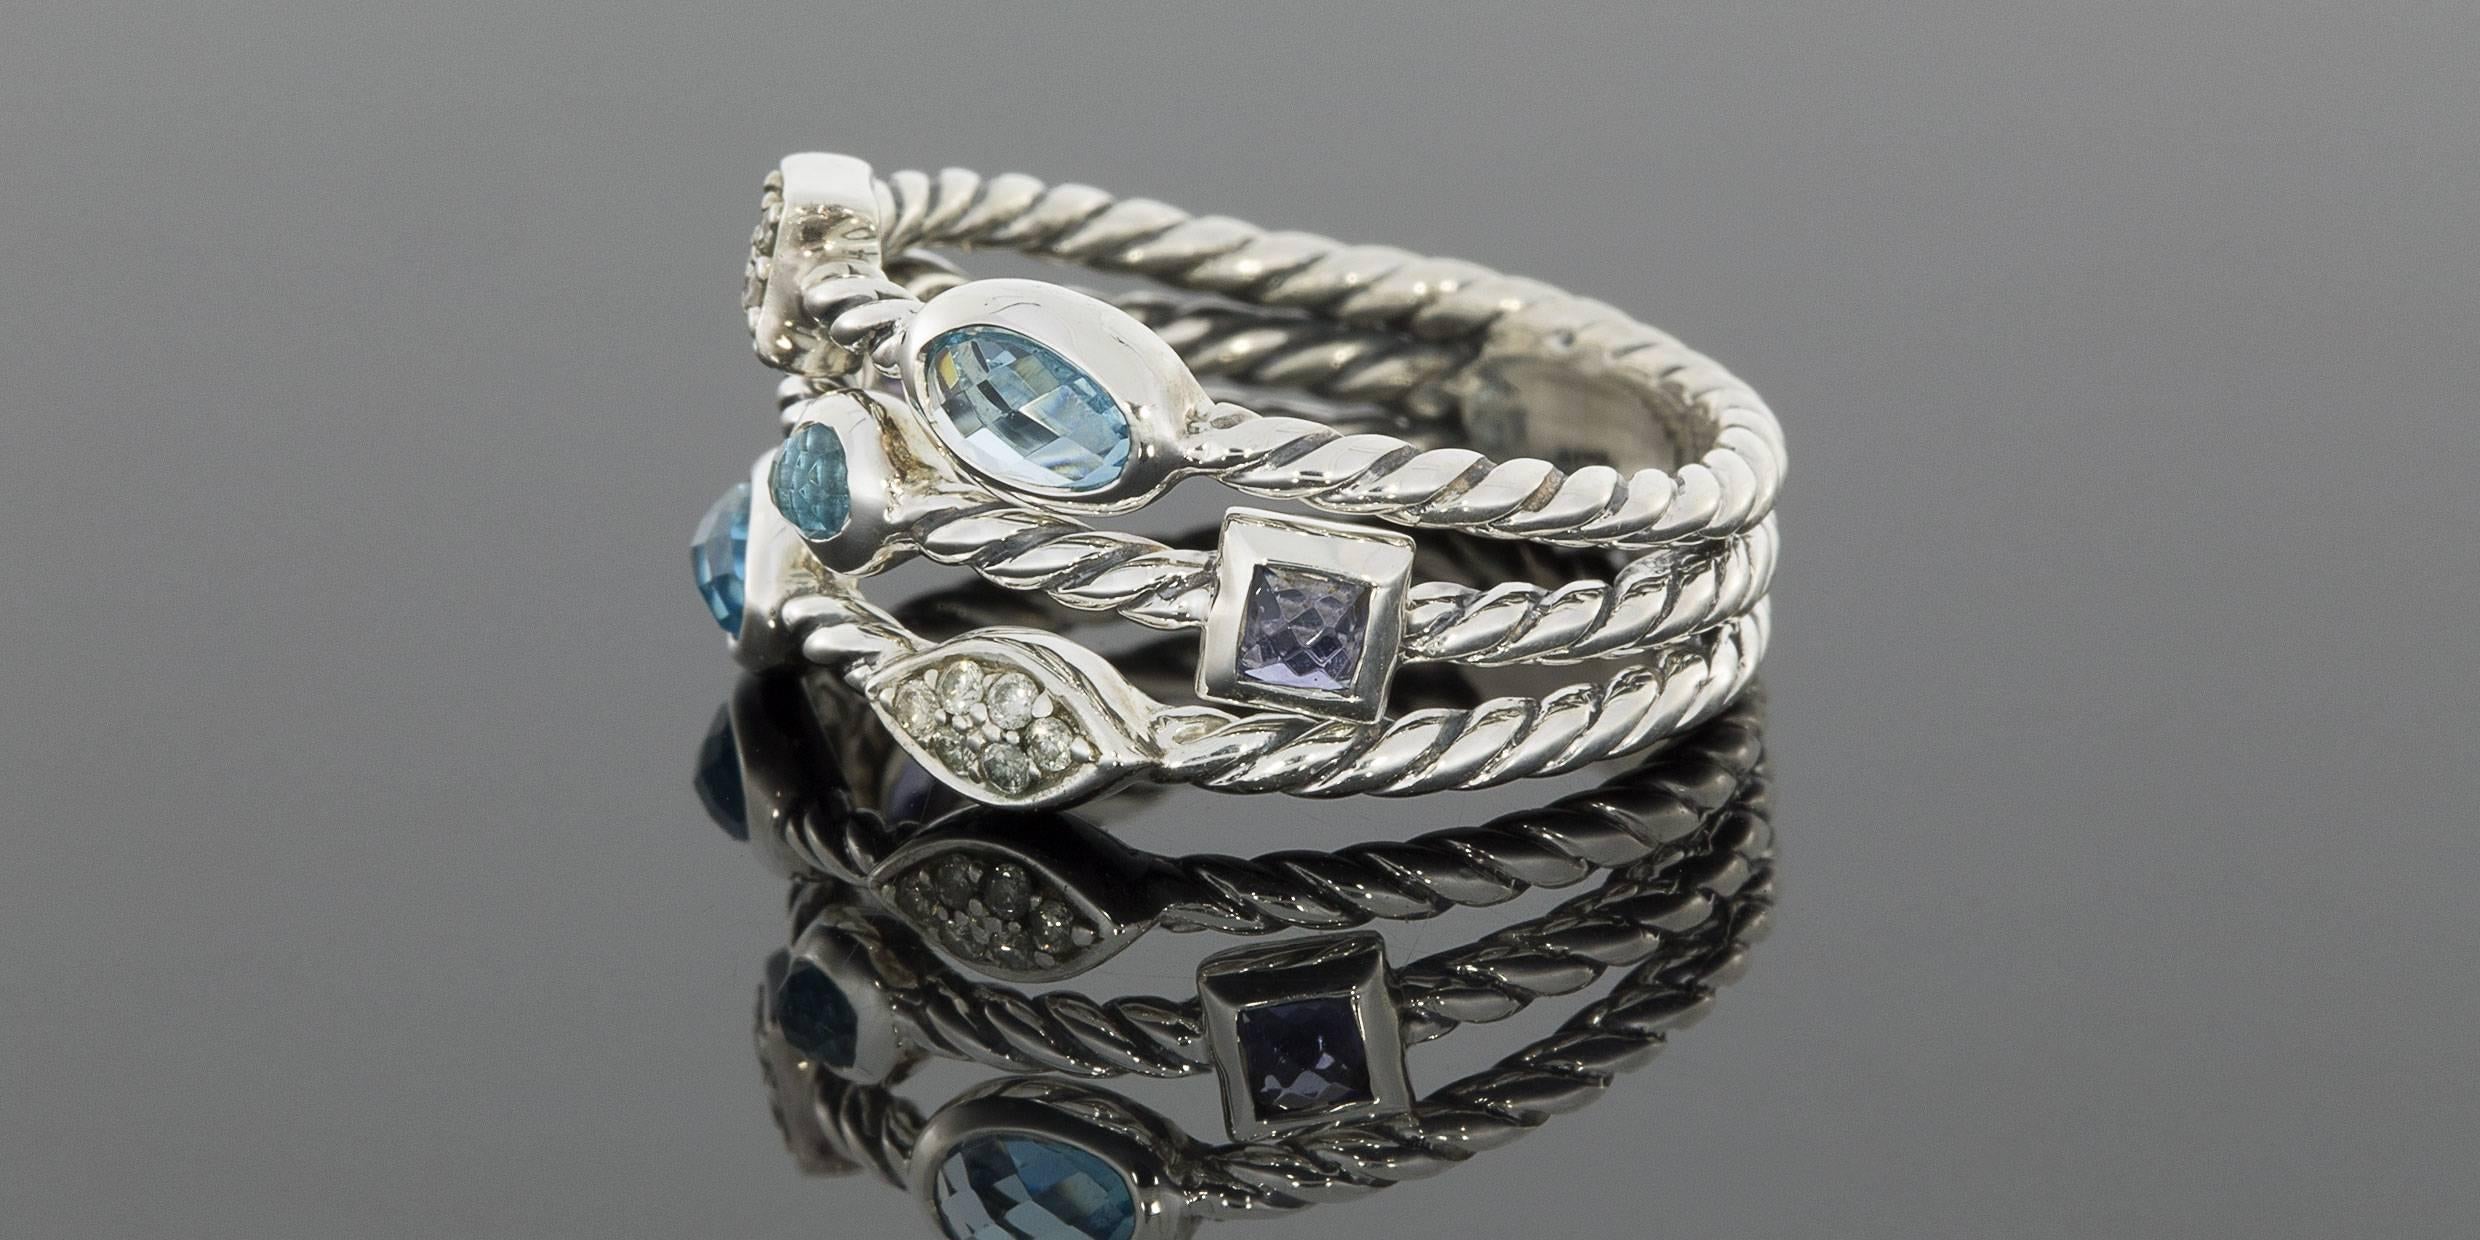 In 1980, sculptor-turned-jeweler David Yurman introduced his eponymous collection. His artistic, sculptural pieces were a refreshing new interpretation, but David Yurman truly changed the trends of fashion with his now-classic twisted cable-inspired